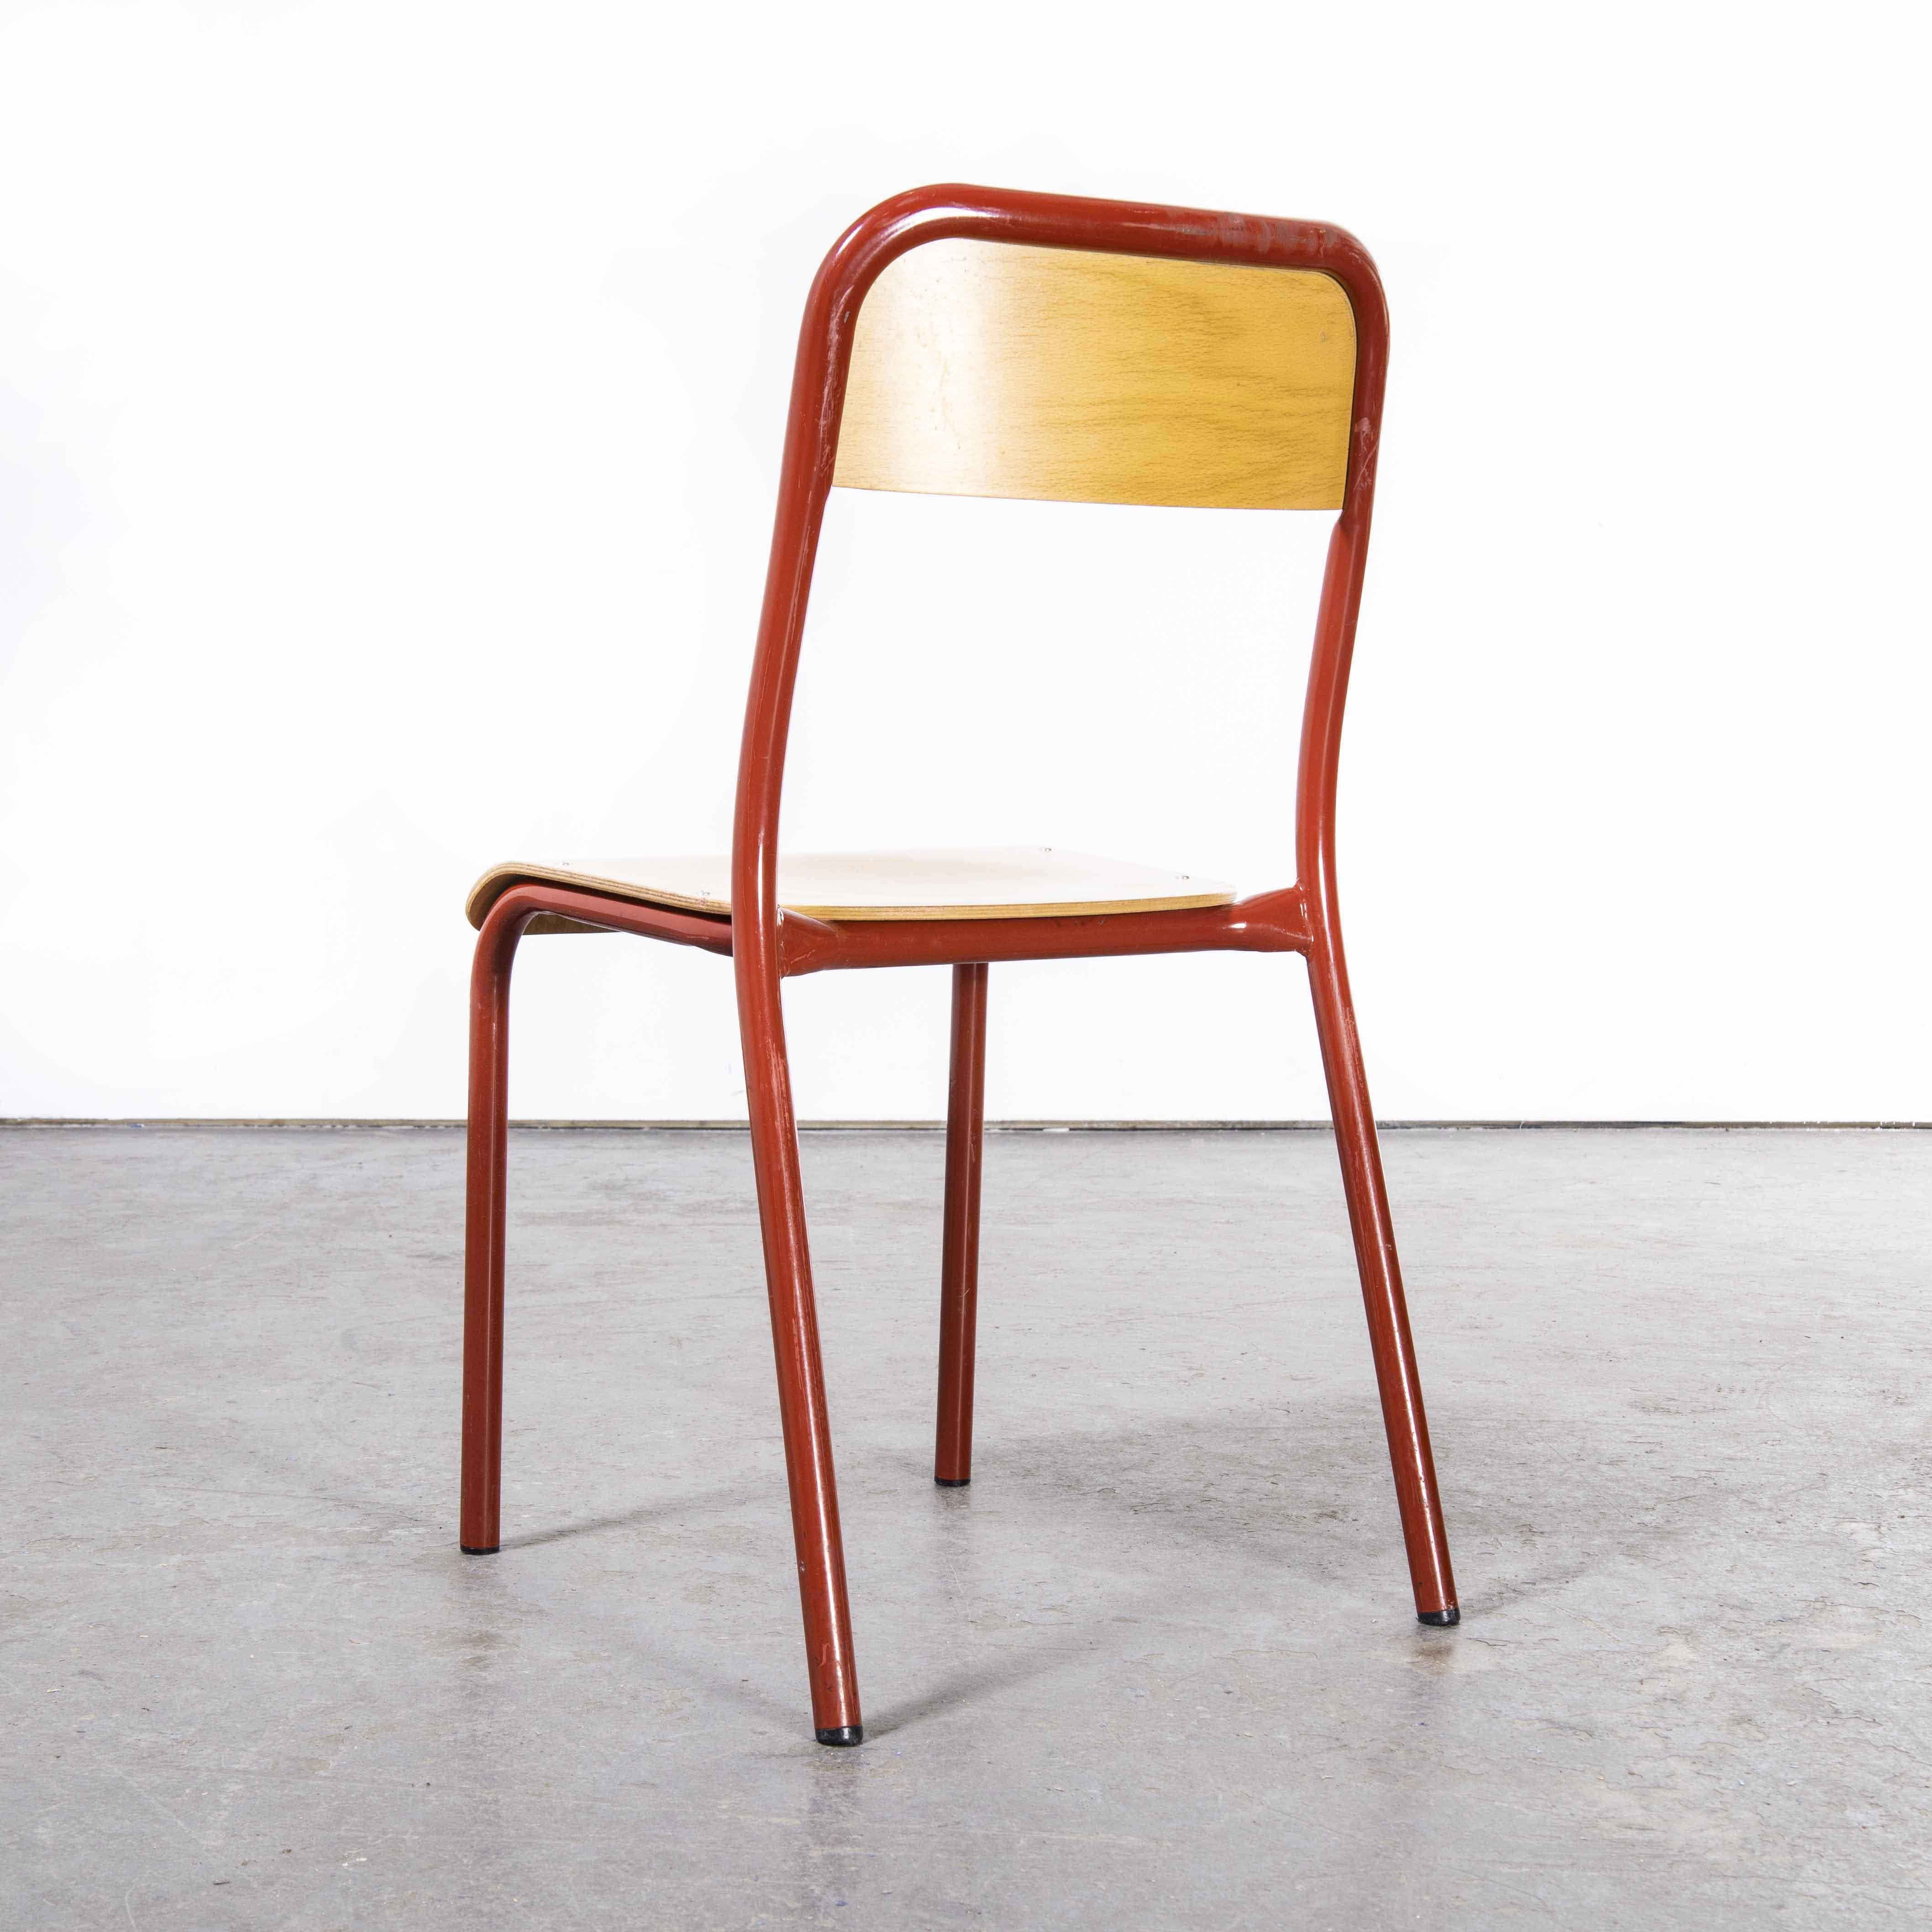 1970’s French Mullca stacking chair – red 2 – set of four
1970’s French Mullca stacking chair – red 2 – set of four. One of our most favourite chairs, in 1947 Robert Muller and Gaston Cavaillon created the company that went on to develop arguably